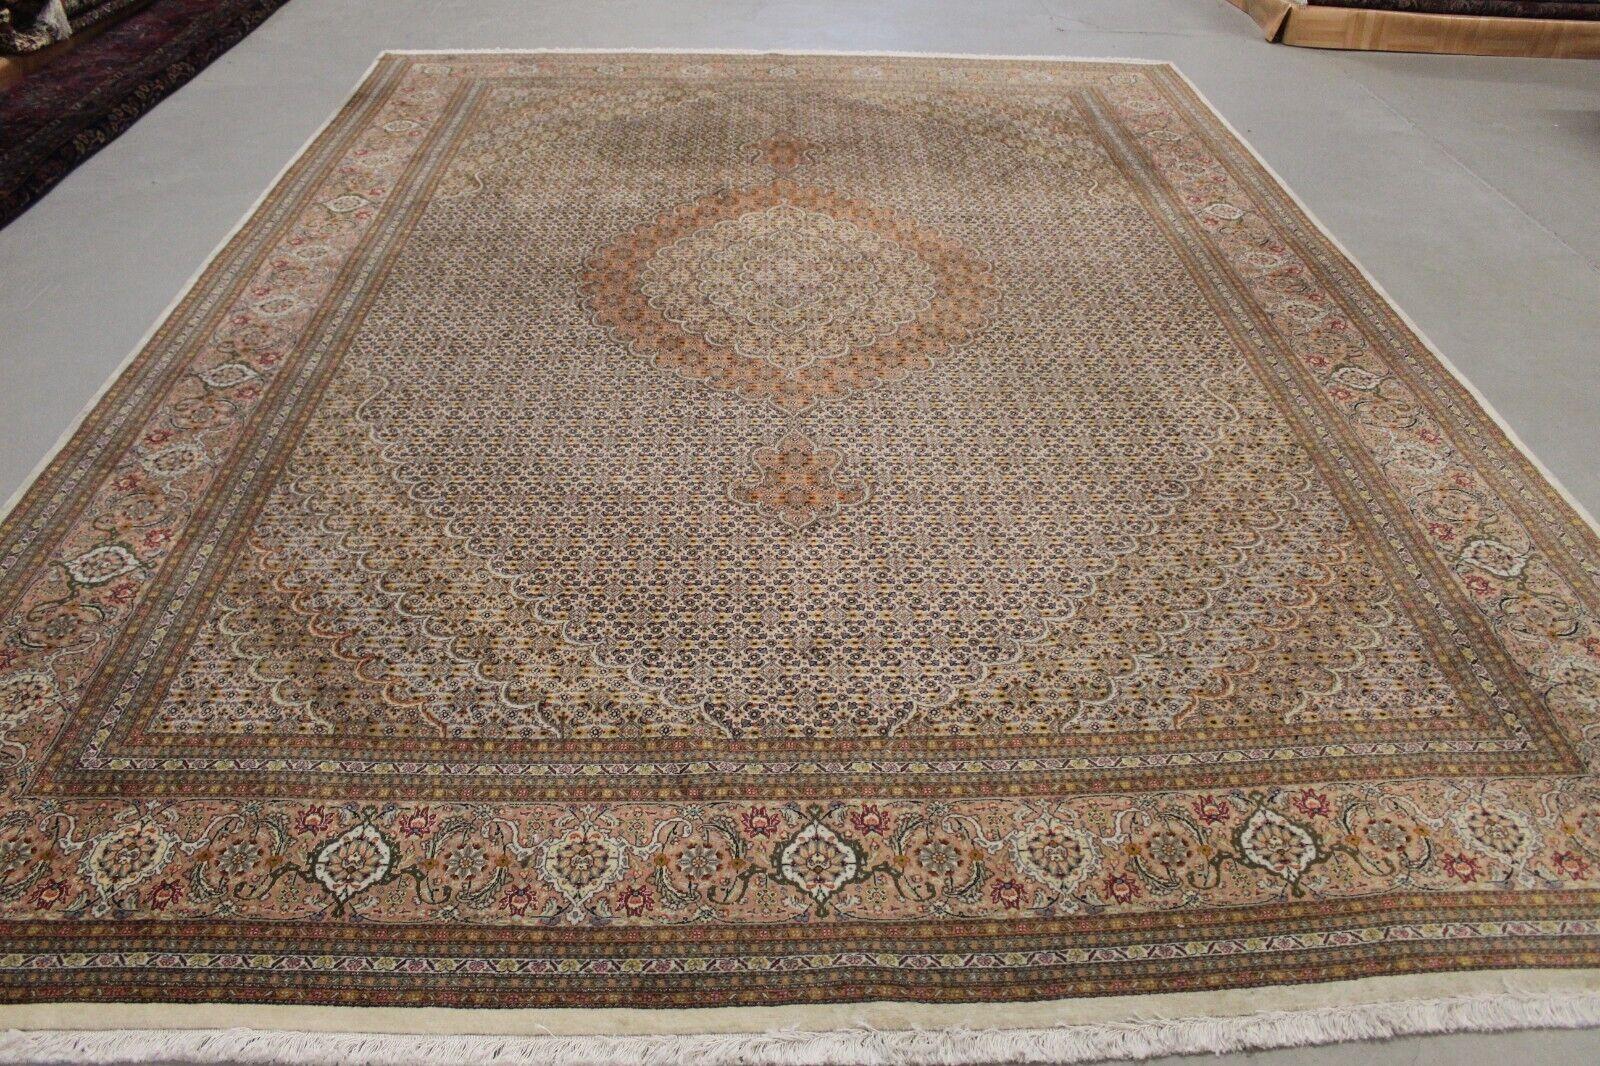 Hand-Knotted Handmade Vintage Persian Style Tabriz 50 Raj Rug 8.2' x 11.3', 1960s - 1K41 For Sale